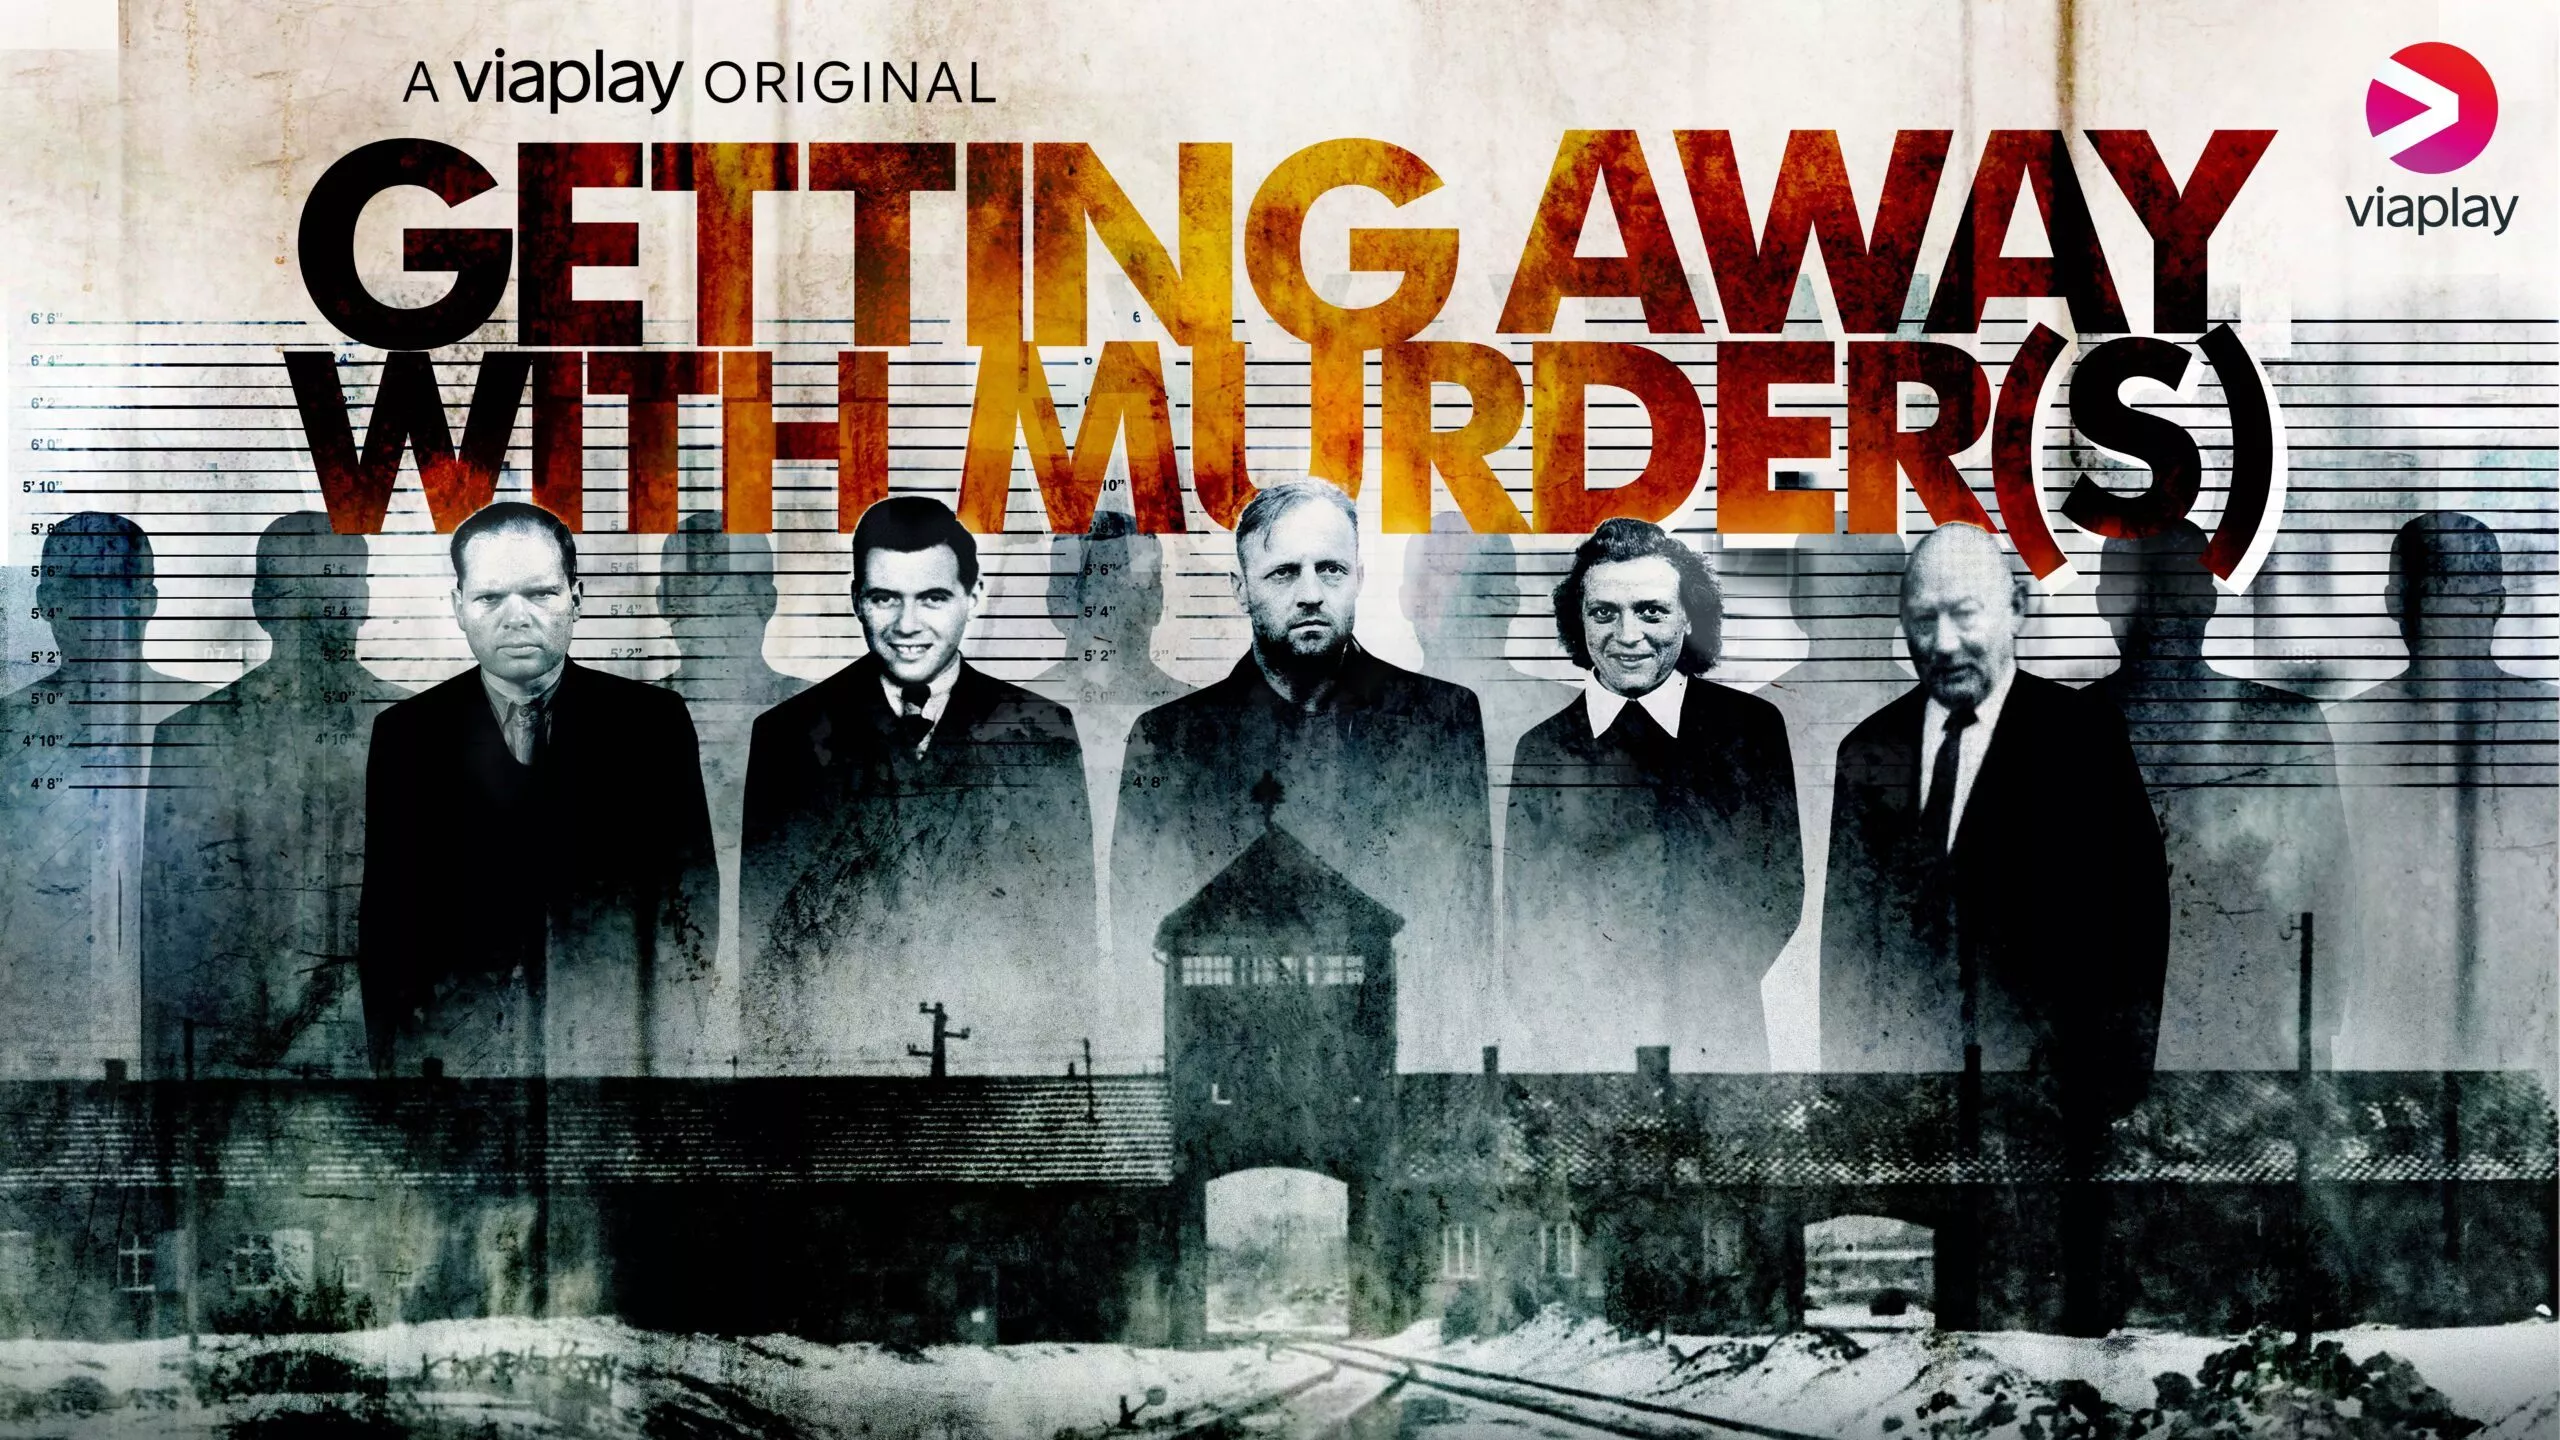 Getting Away With Murder(s) (2021) UK Trailer